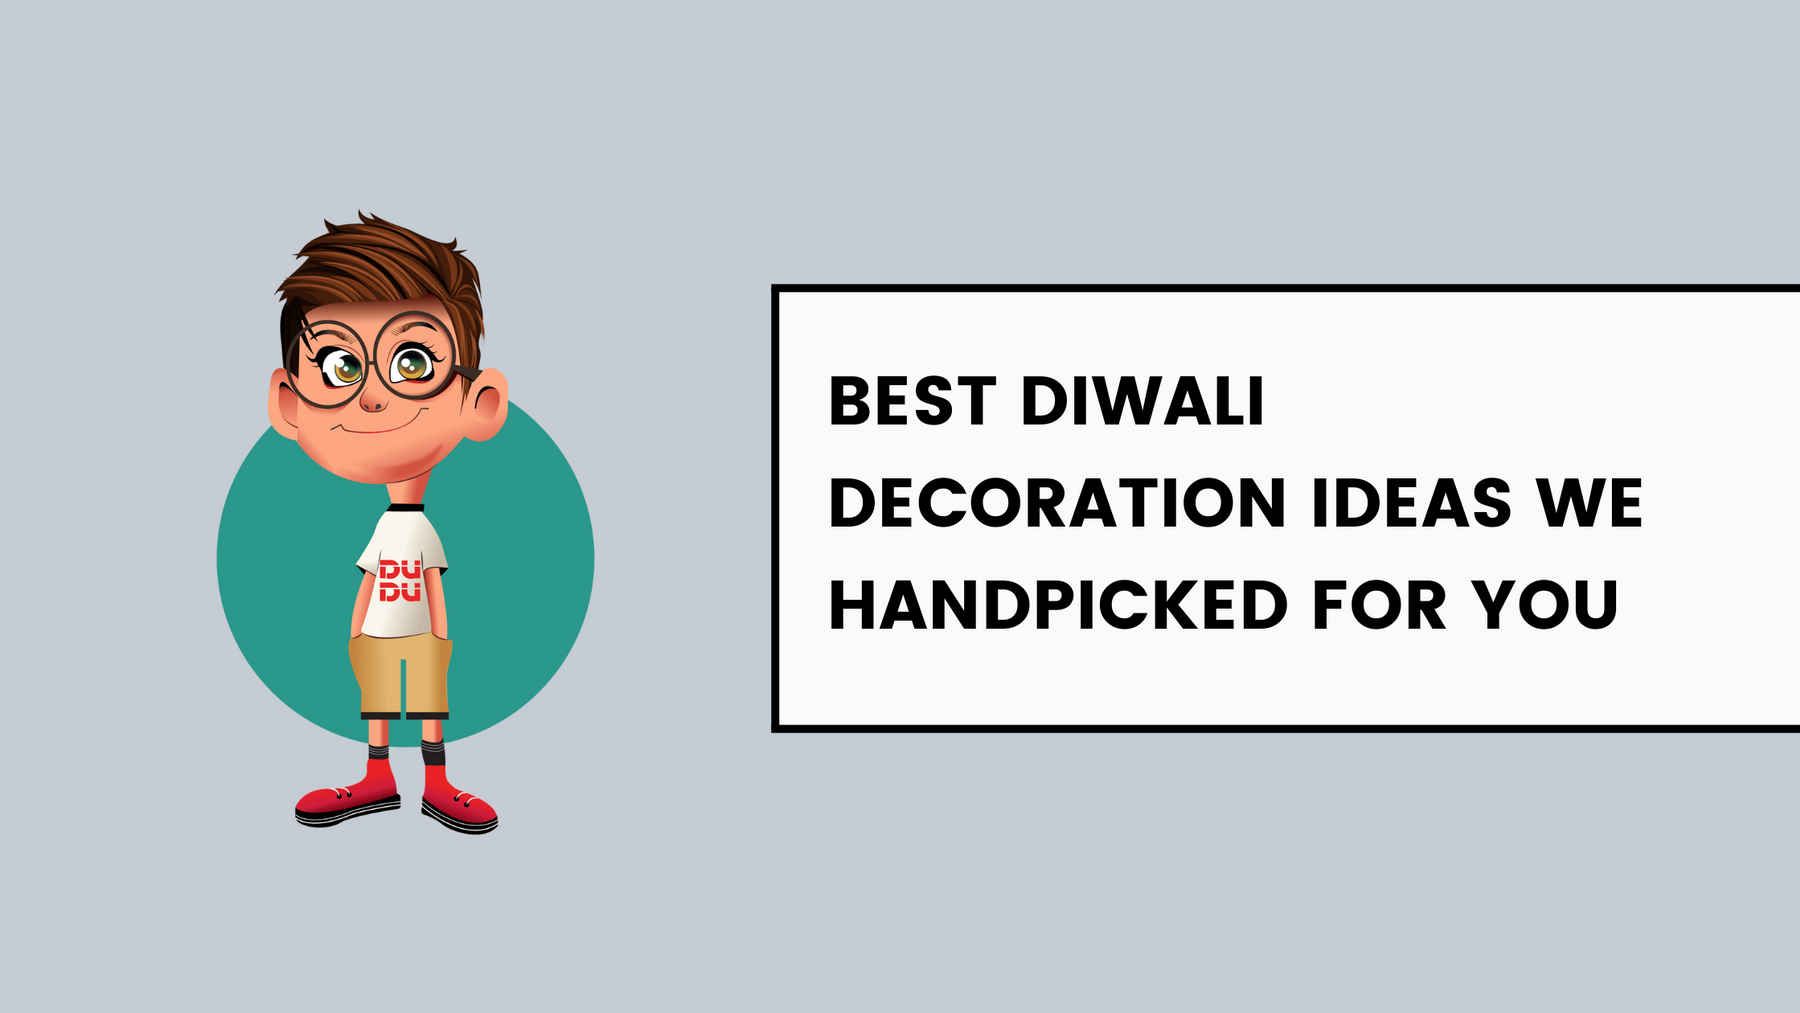 Best Diwali Decoration Ideas We Handpicked For You